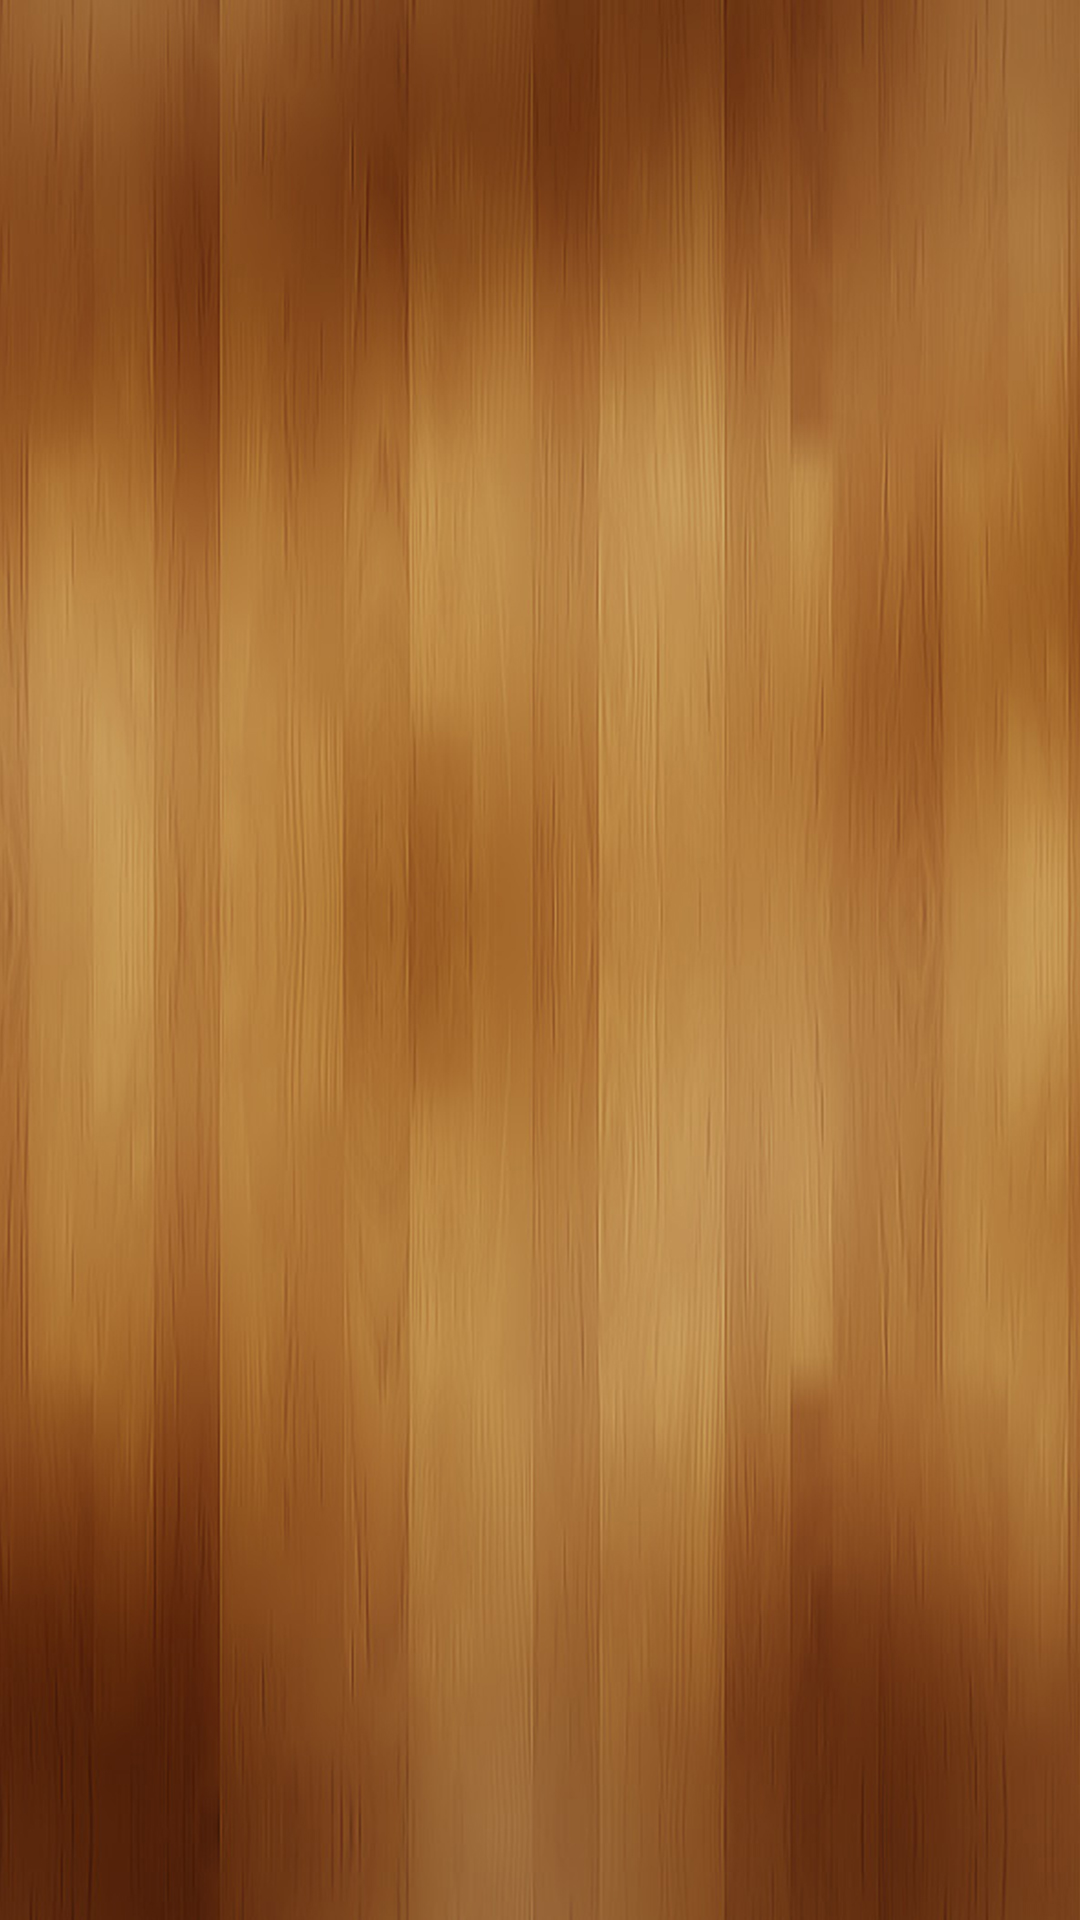 Iphone Wallpaper - Wood Texture Wallpapers For Iphone , HD Wallpaper & Backgrounds